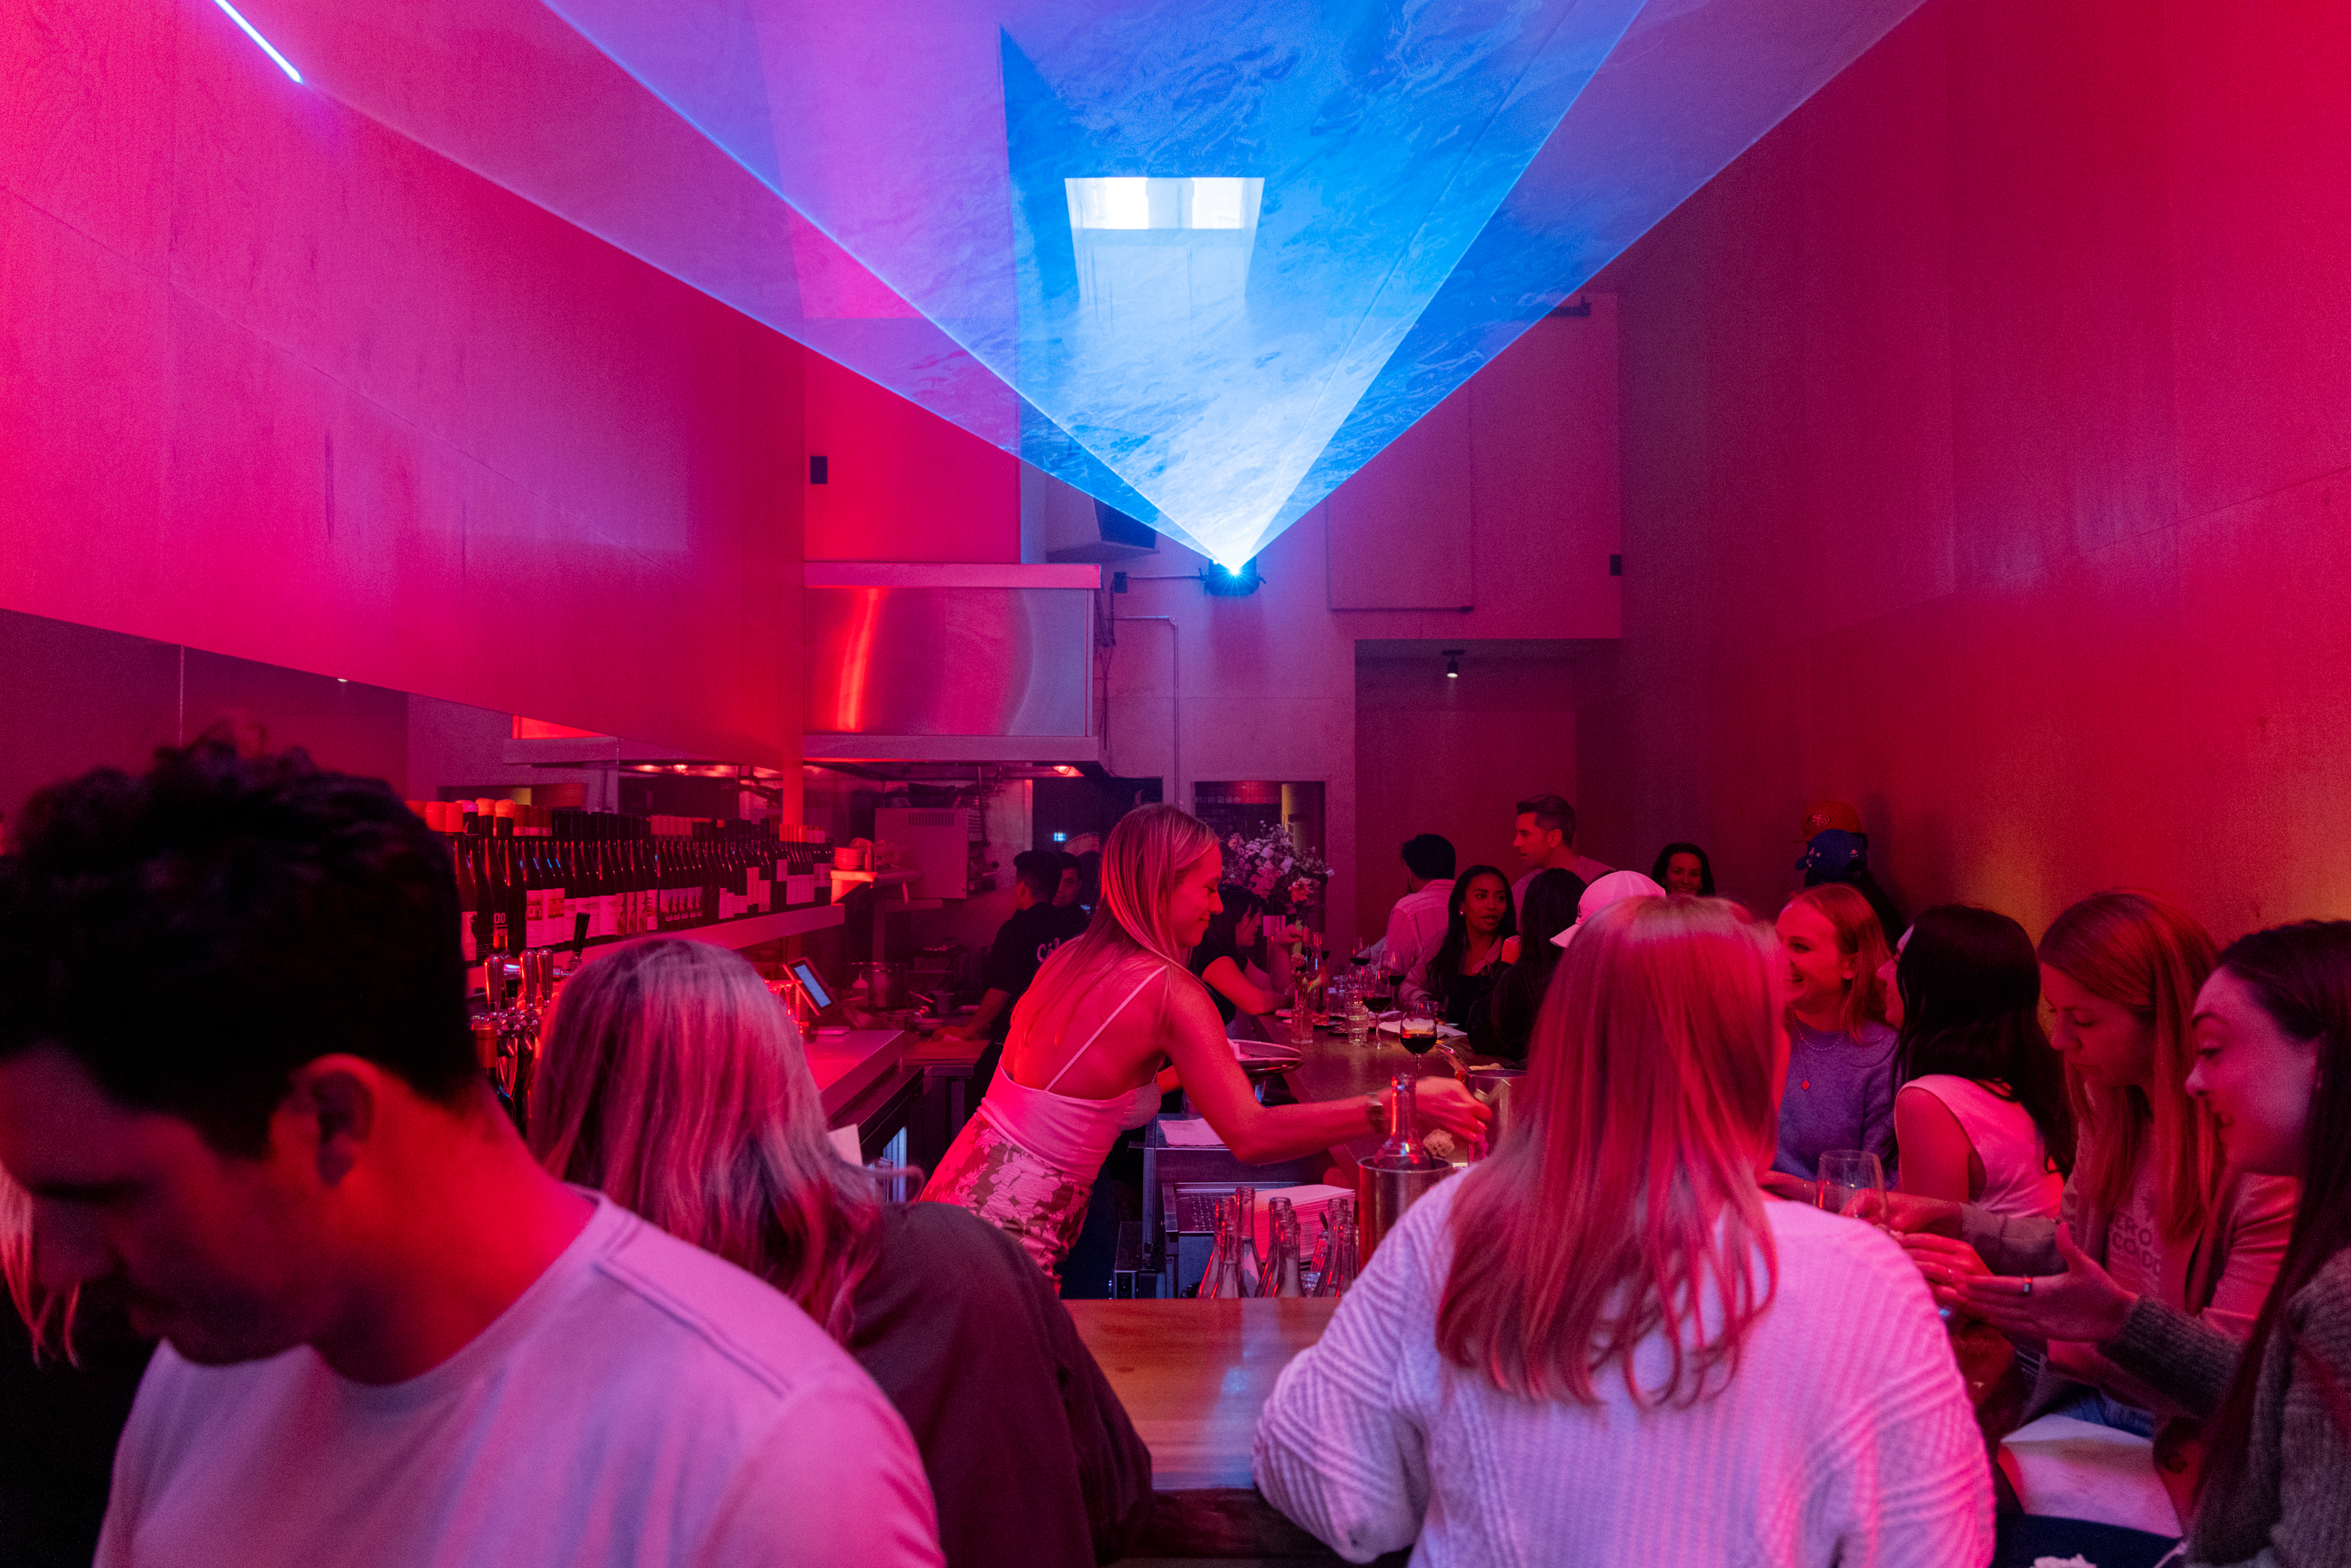 The image shows a vibrant bar scene illuminated by pink and blue lights. Patrons are socializing at the bar and surrounding tables, with drinks in hand. A bartender is seen interacting with customers.